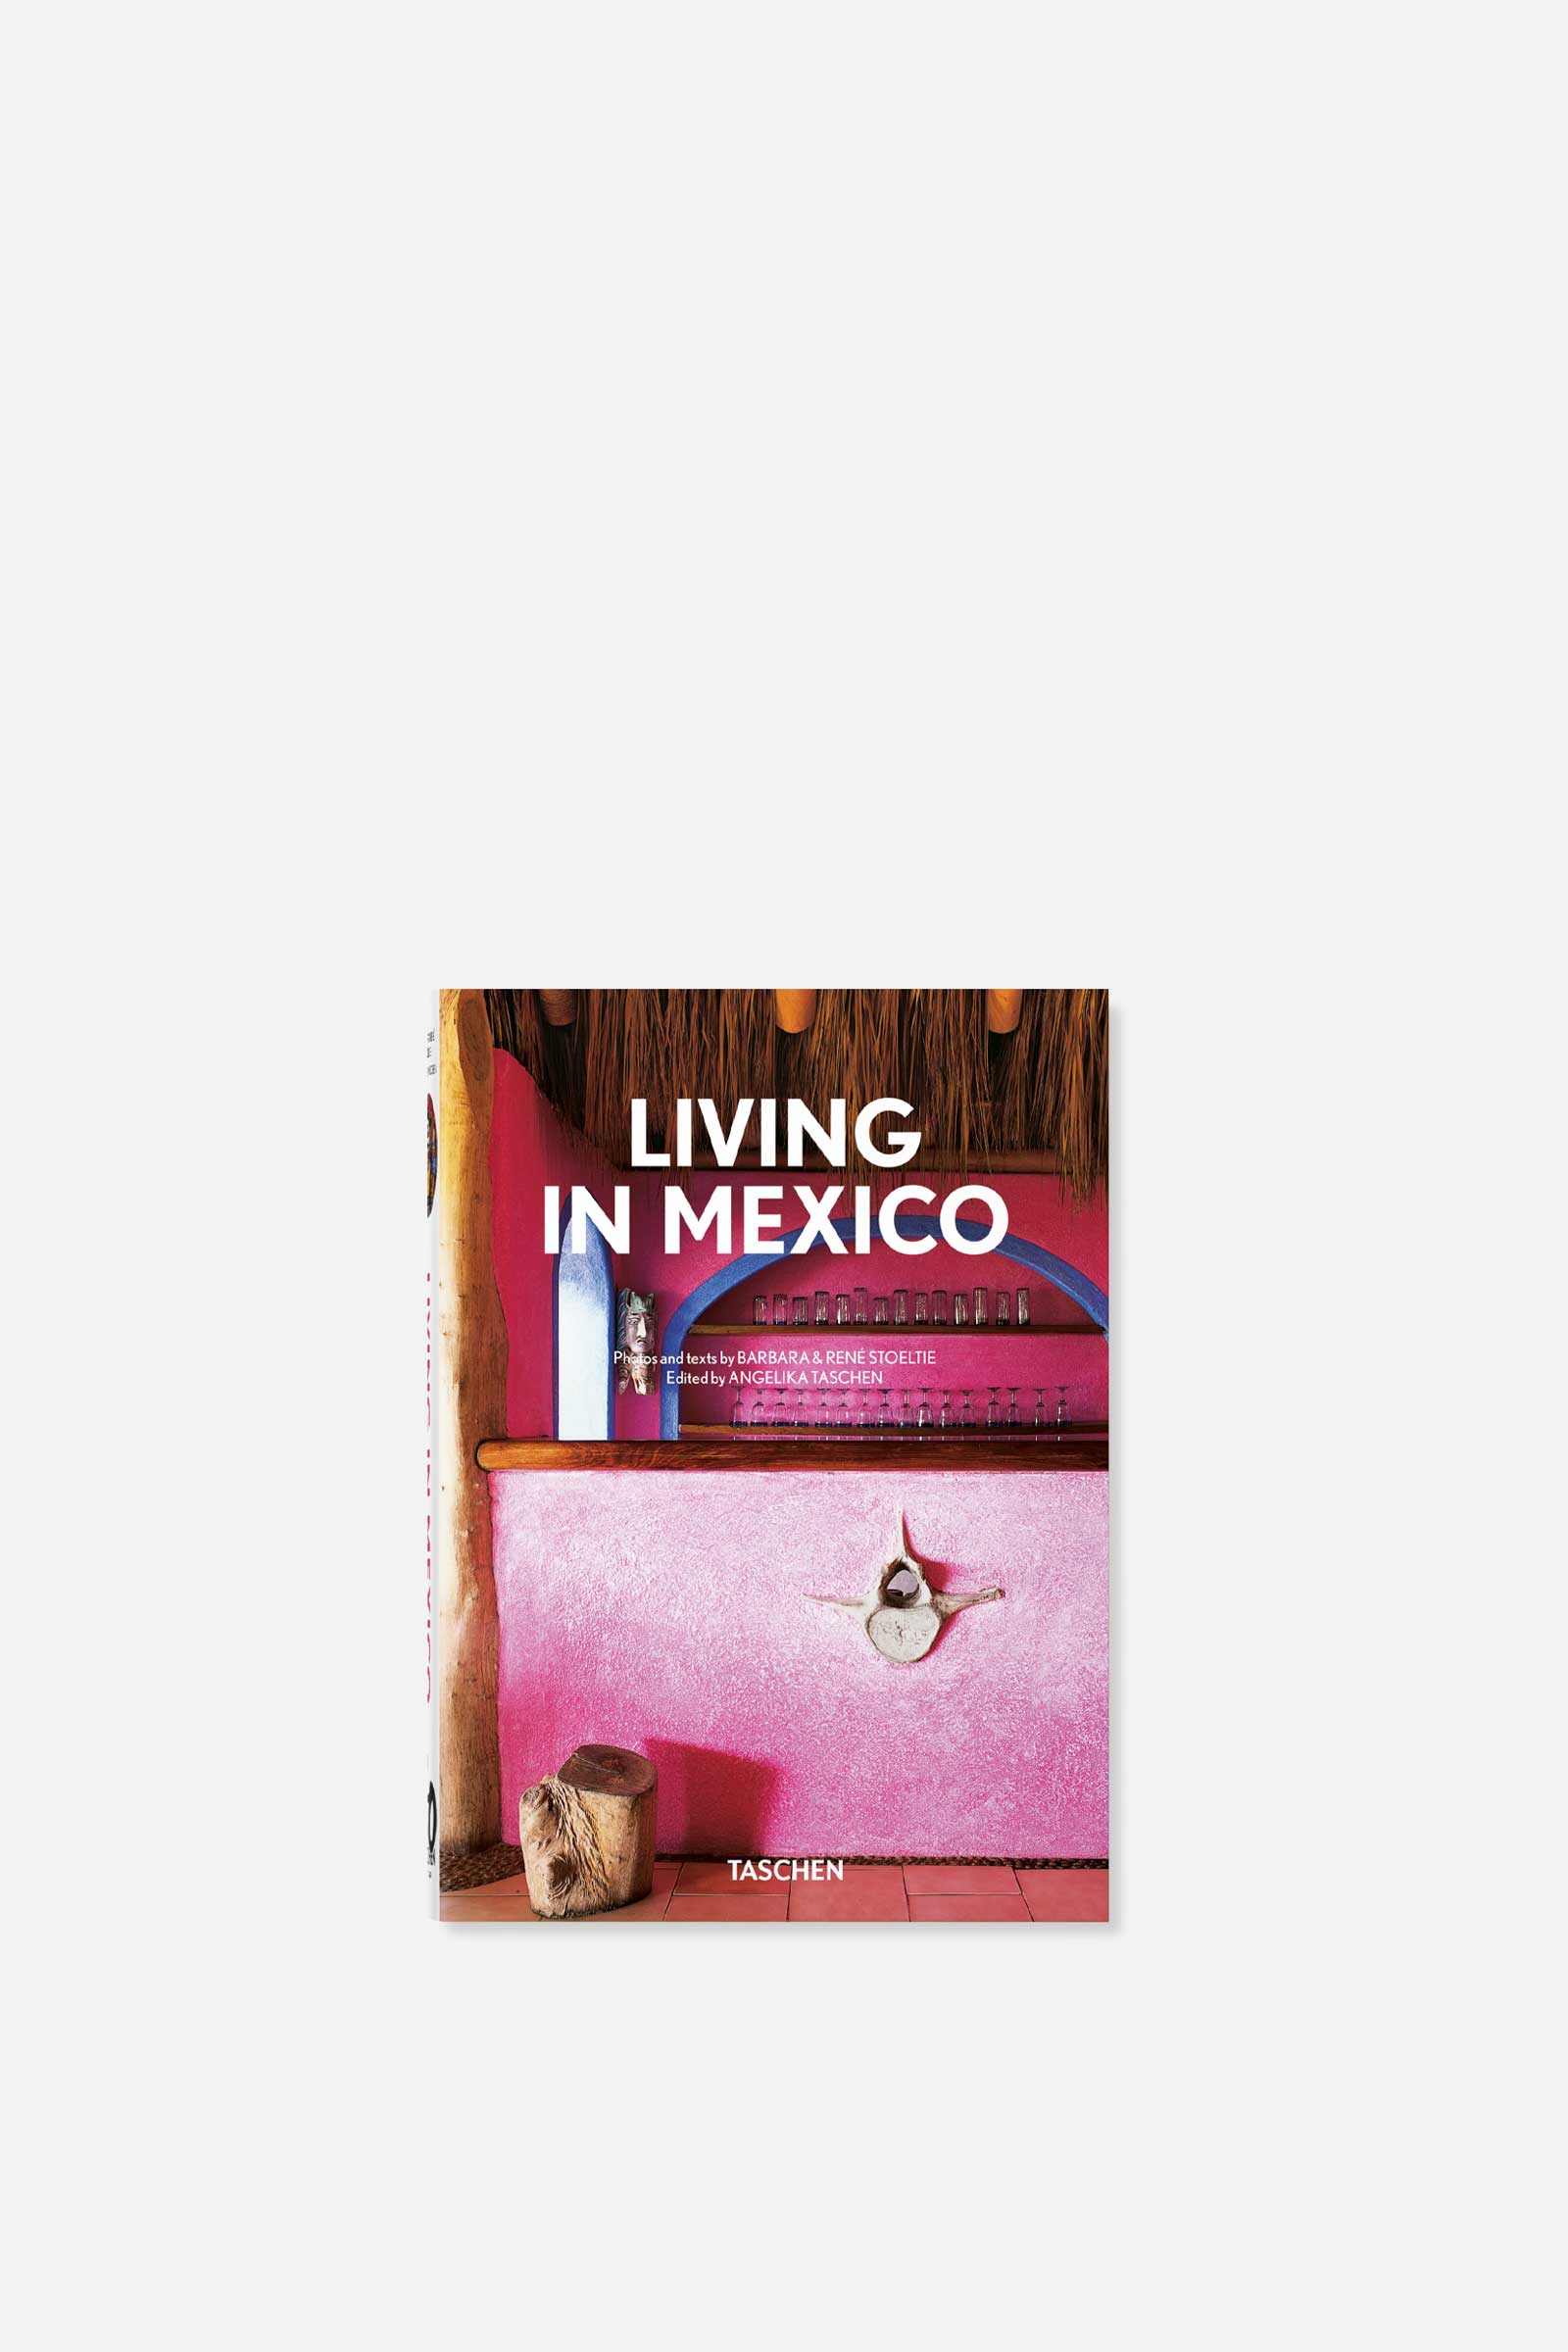 Living in Mexico. 40th Ed.